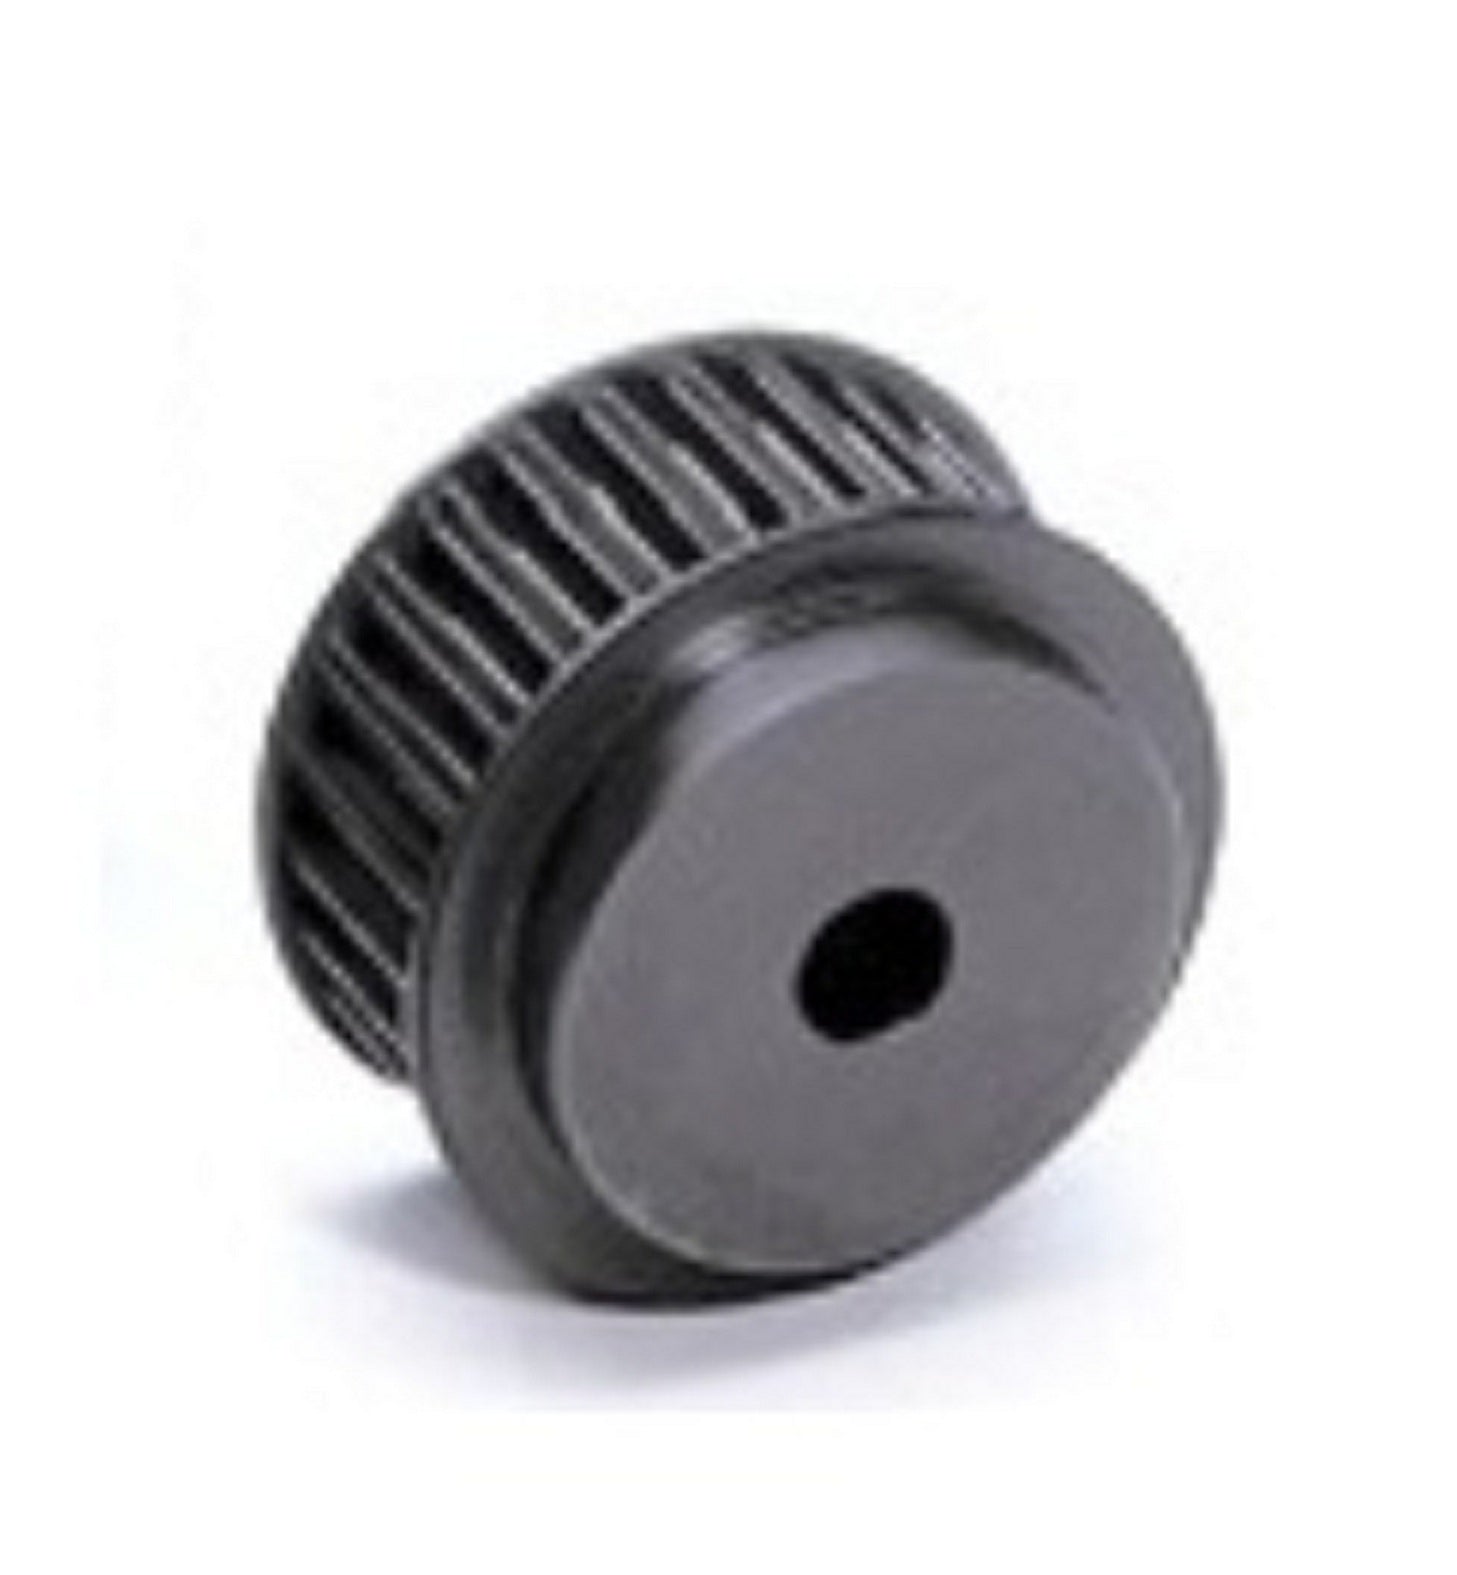 27-8M-30 Steel Pulley 27 tooth MPB